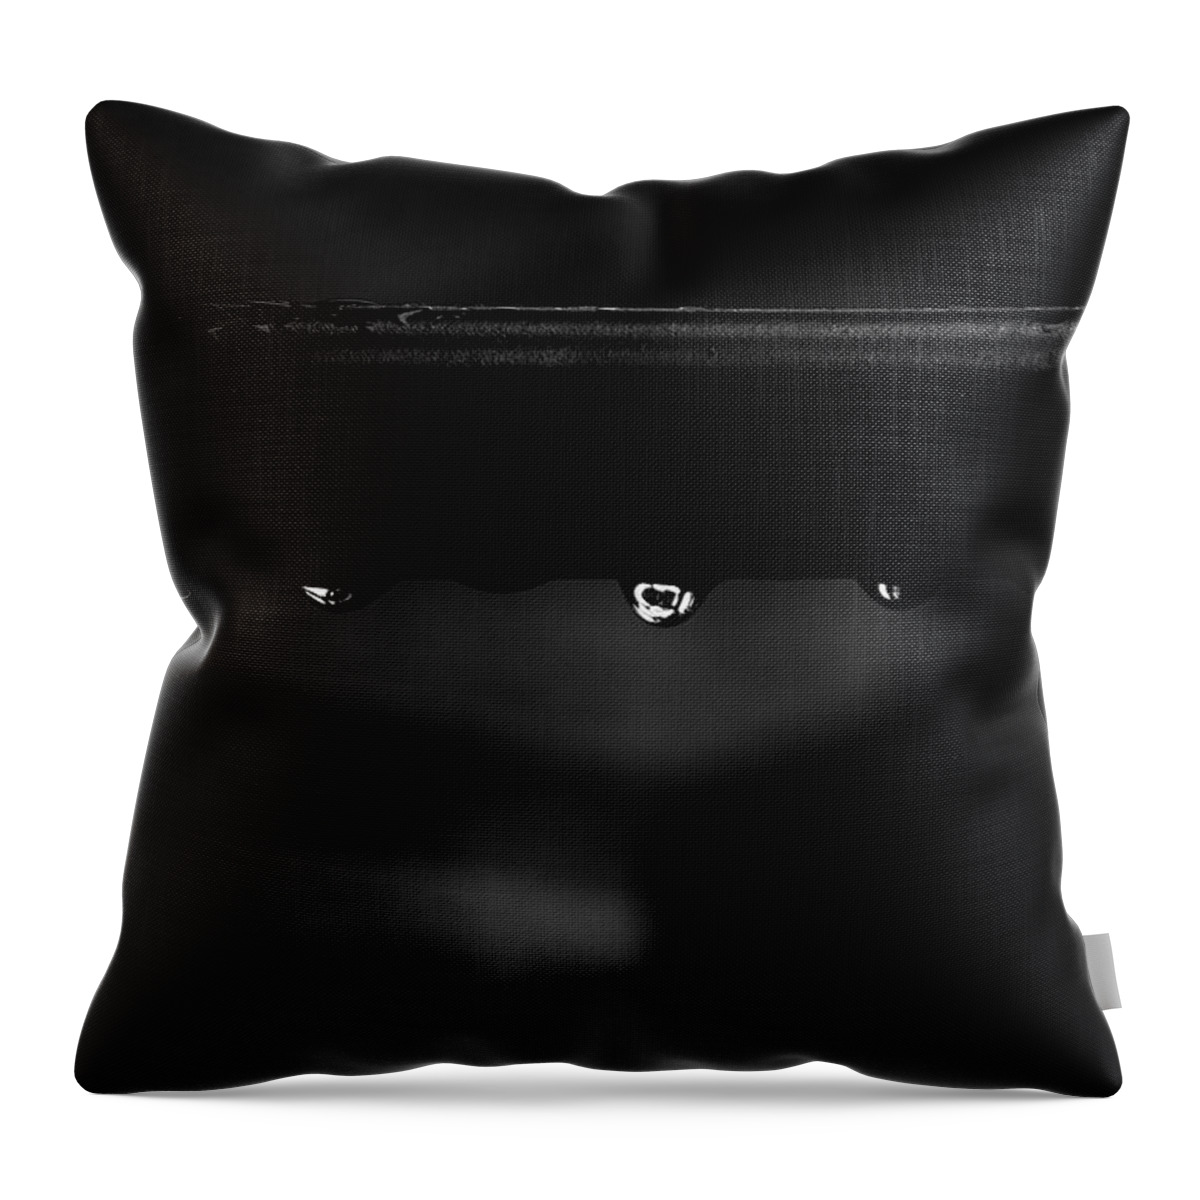 Water Drops Throw Pillow featuring the photograph Wet Bar by Richard Rizzo